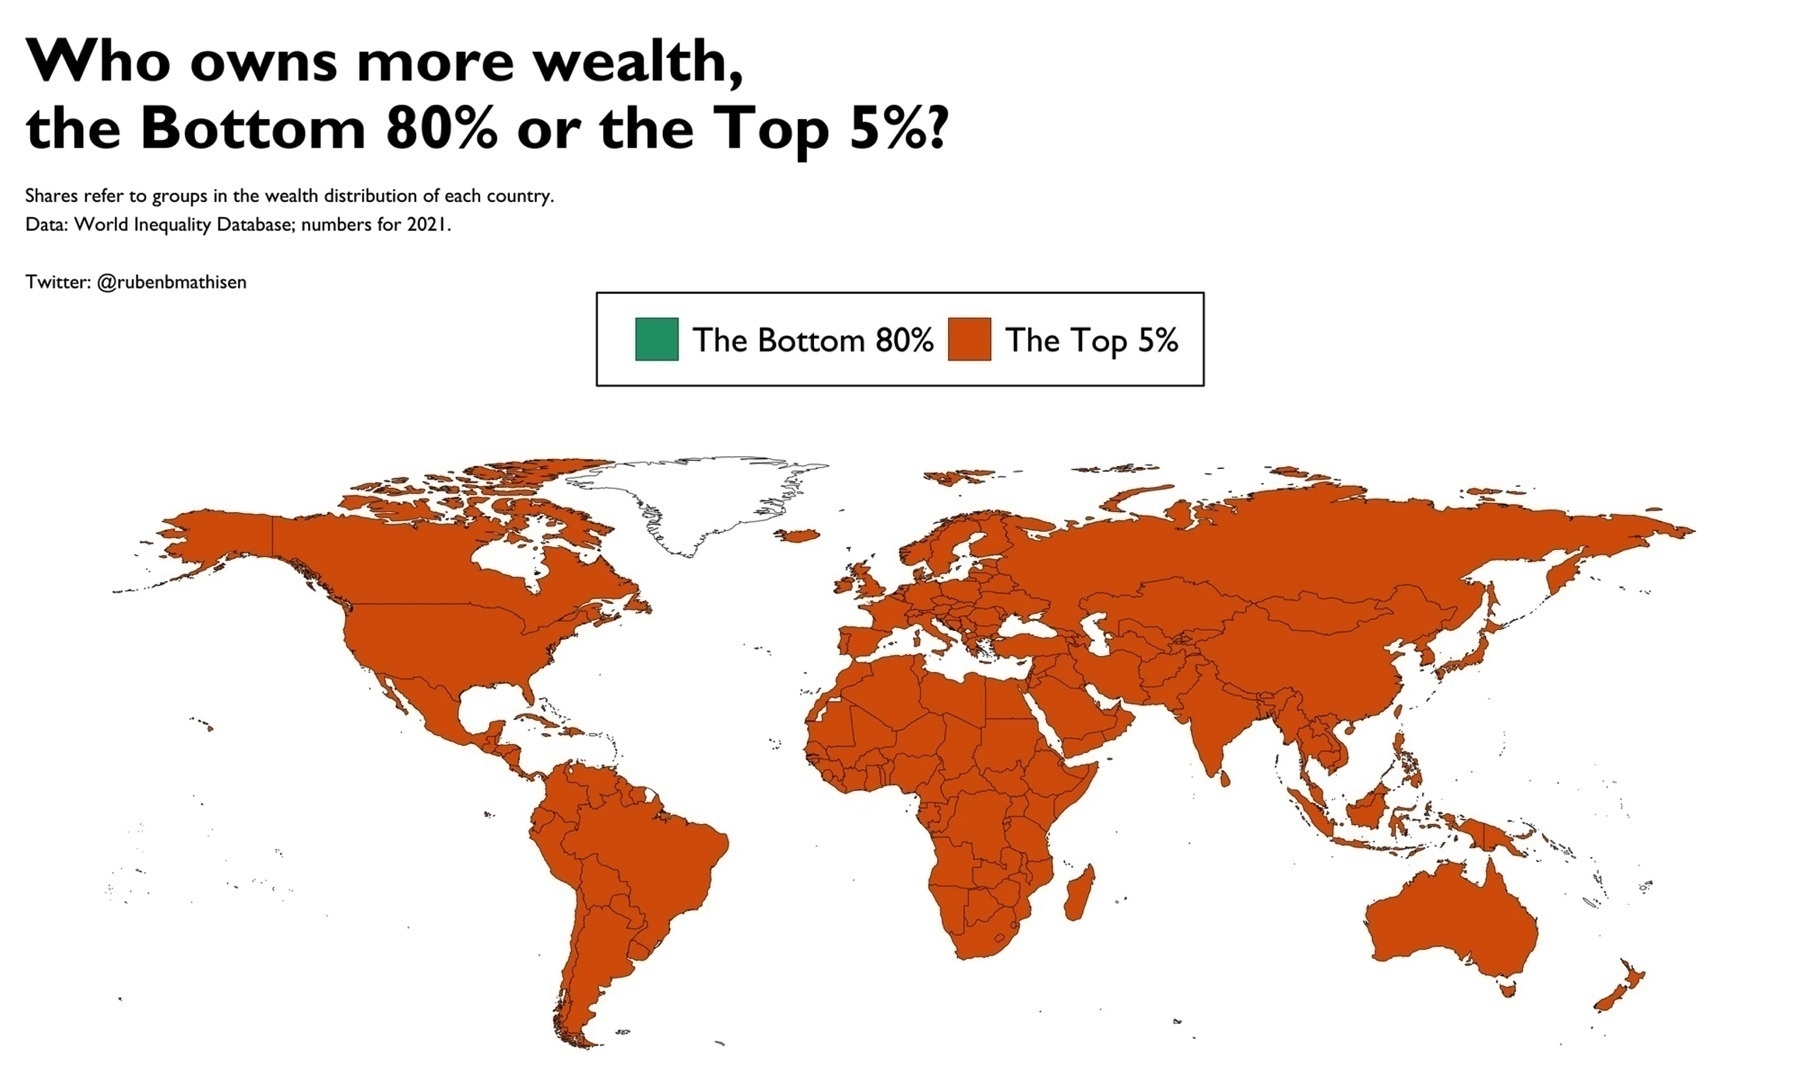 Map of the world. Legend shows two colours: Green for if a country’ss wealth is mostly owned by the bottom 80%, orange showing if the country’s wealth is owned by the top 5%. The world map is entirely coloured ORANGE